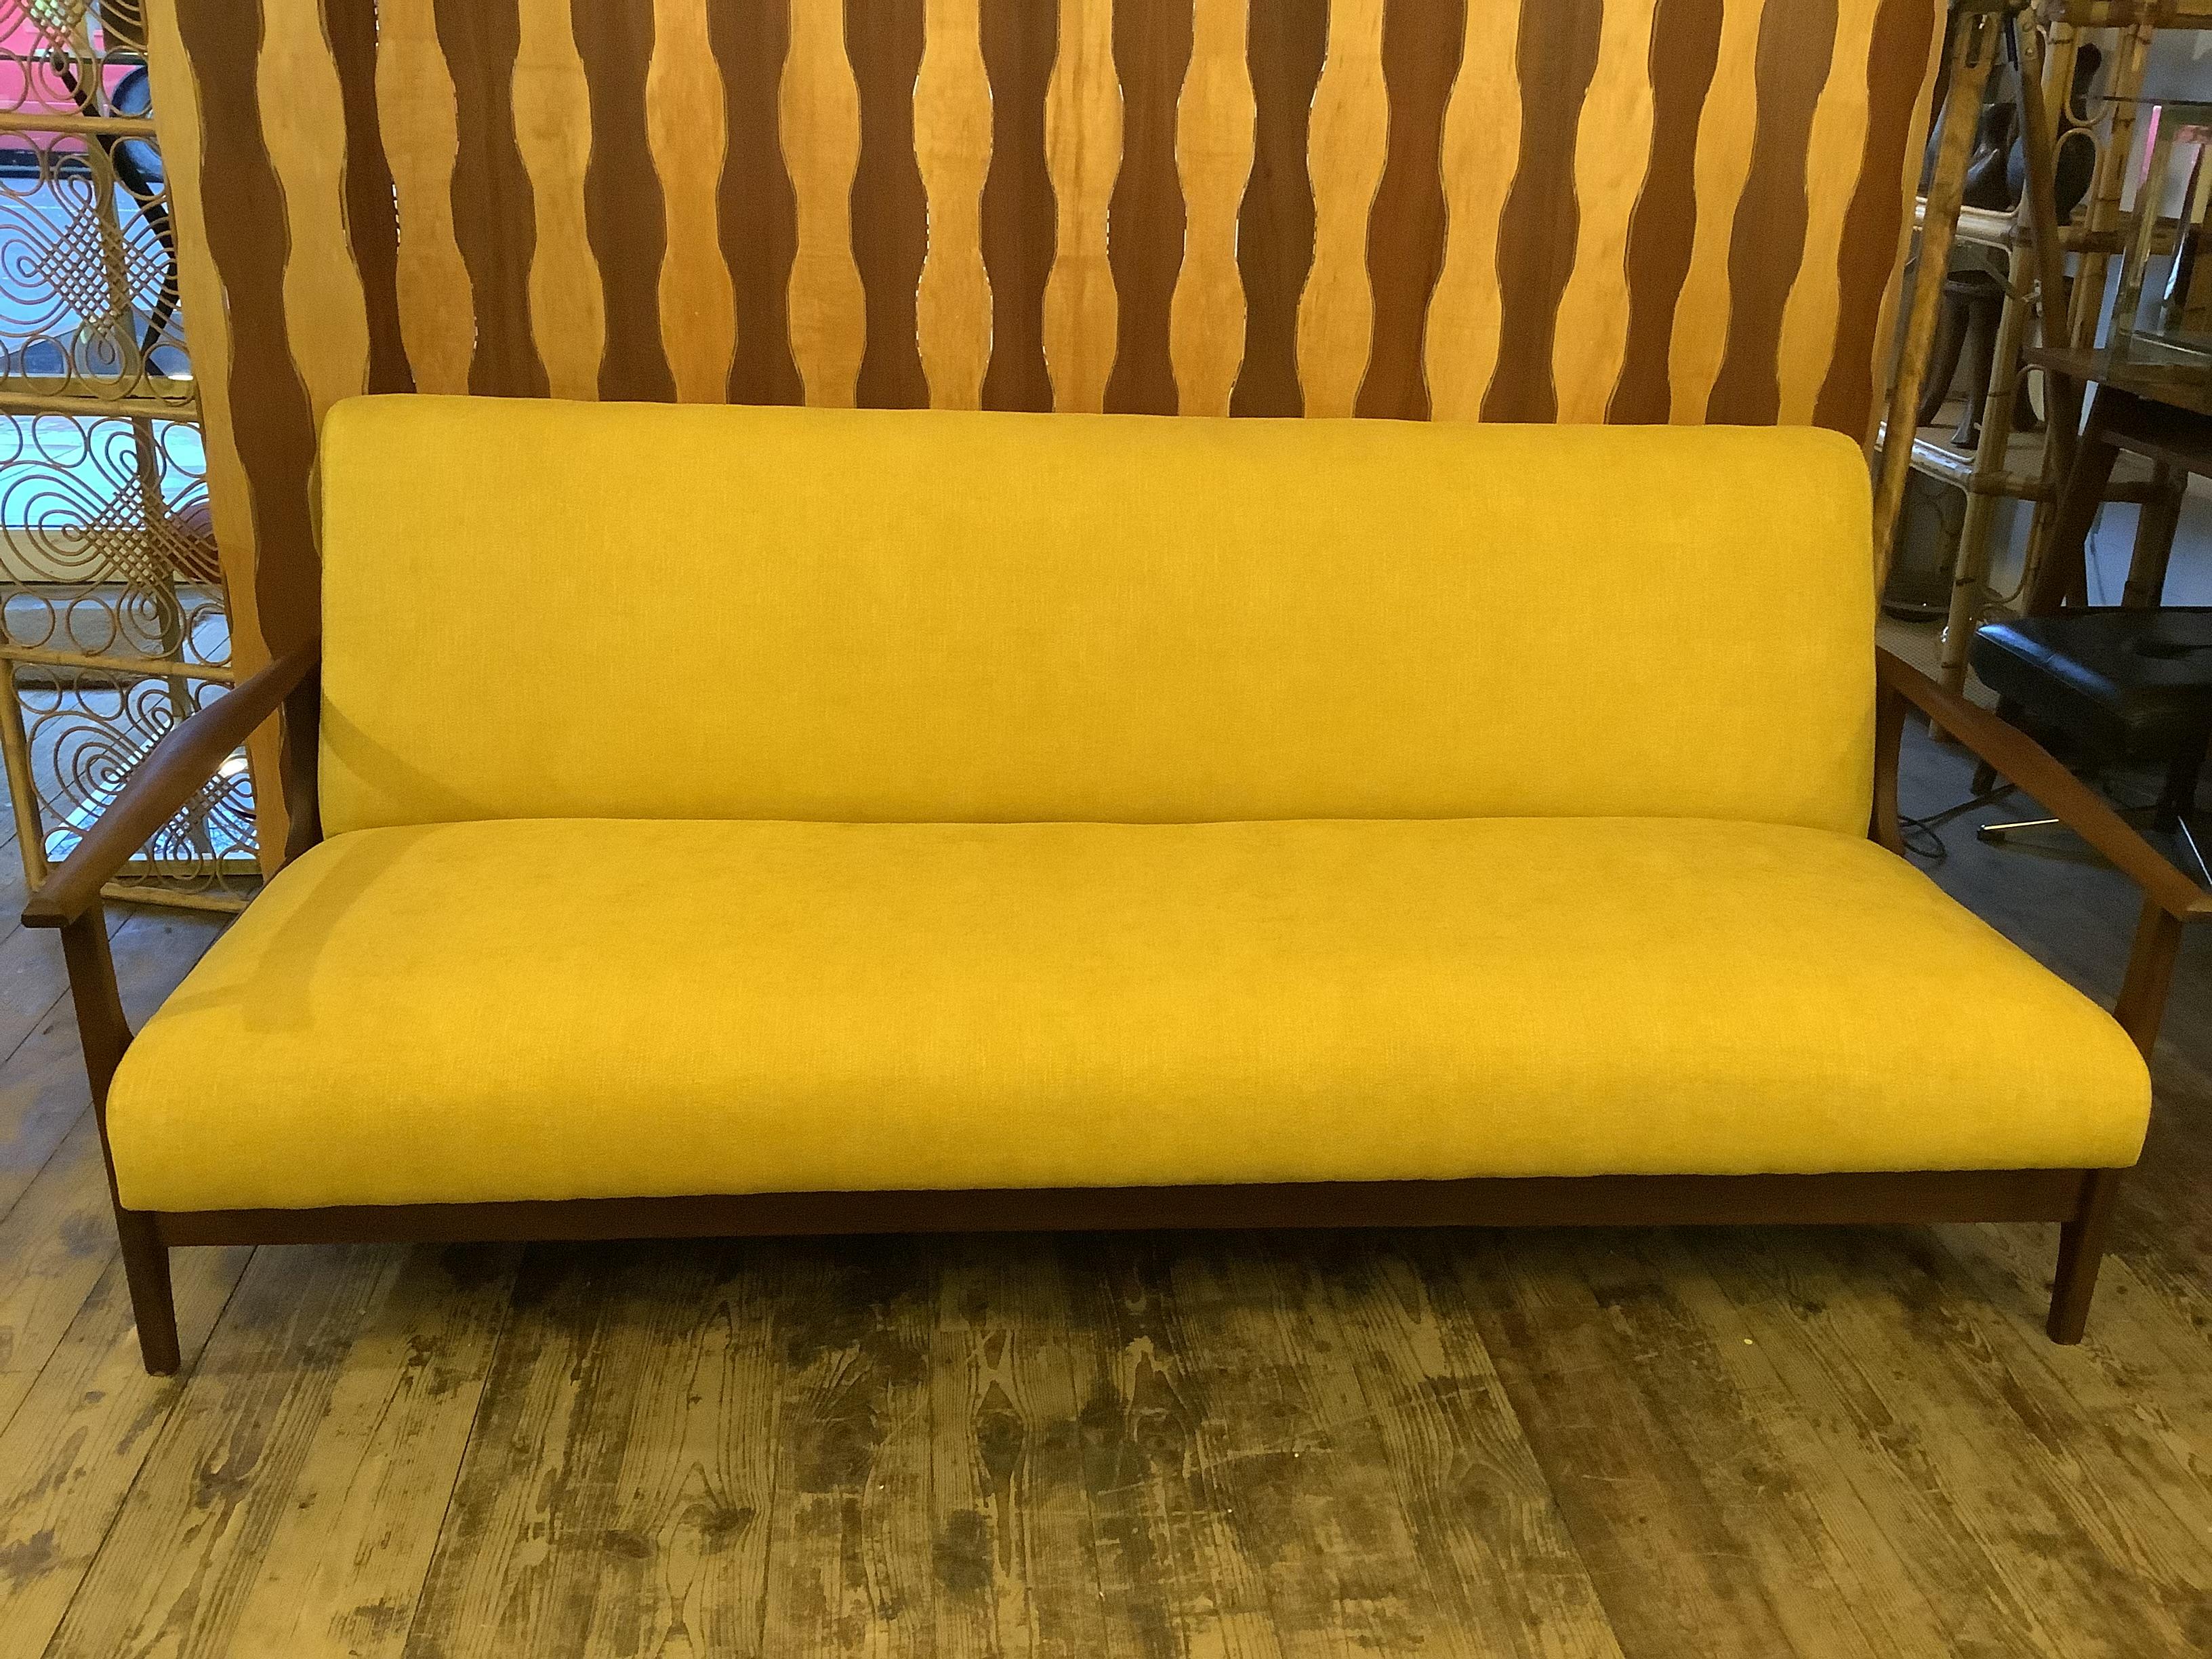 Reupholstered simple stylist functional sofa bed with solid teak frame and 

wonderfully reupholstered butter yellow  soft cotton fabric Cc 1960s